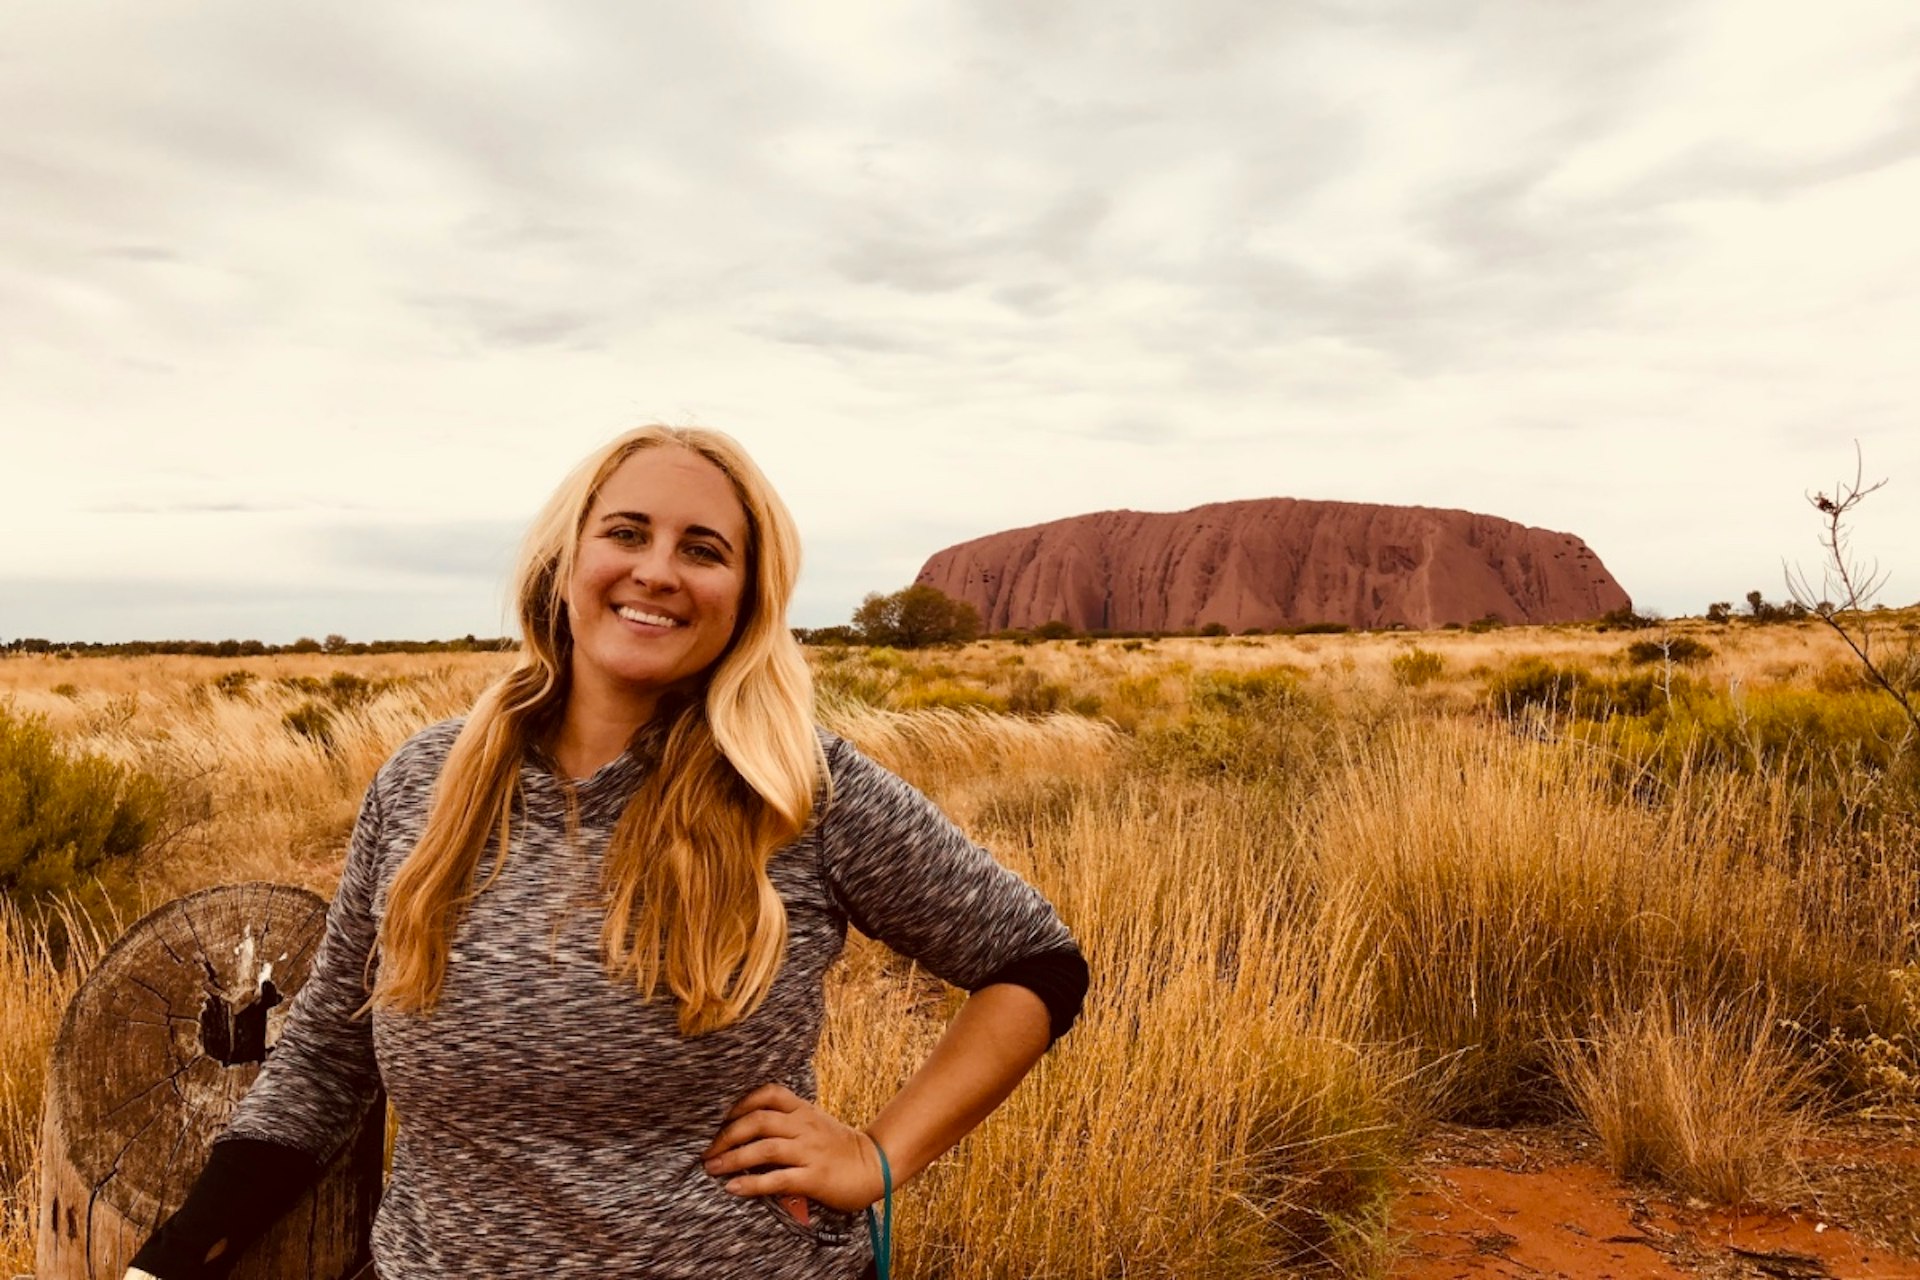 Adrien is standing in front of Uluru in the Australian outback, smiling into the camera with her left hand on her hip. She has long blonde hair, and is wearing a black and white top.